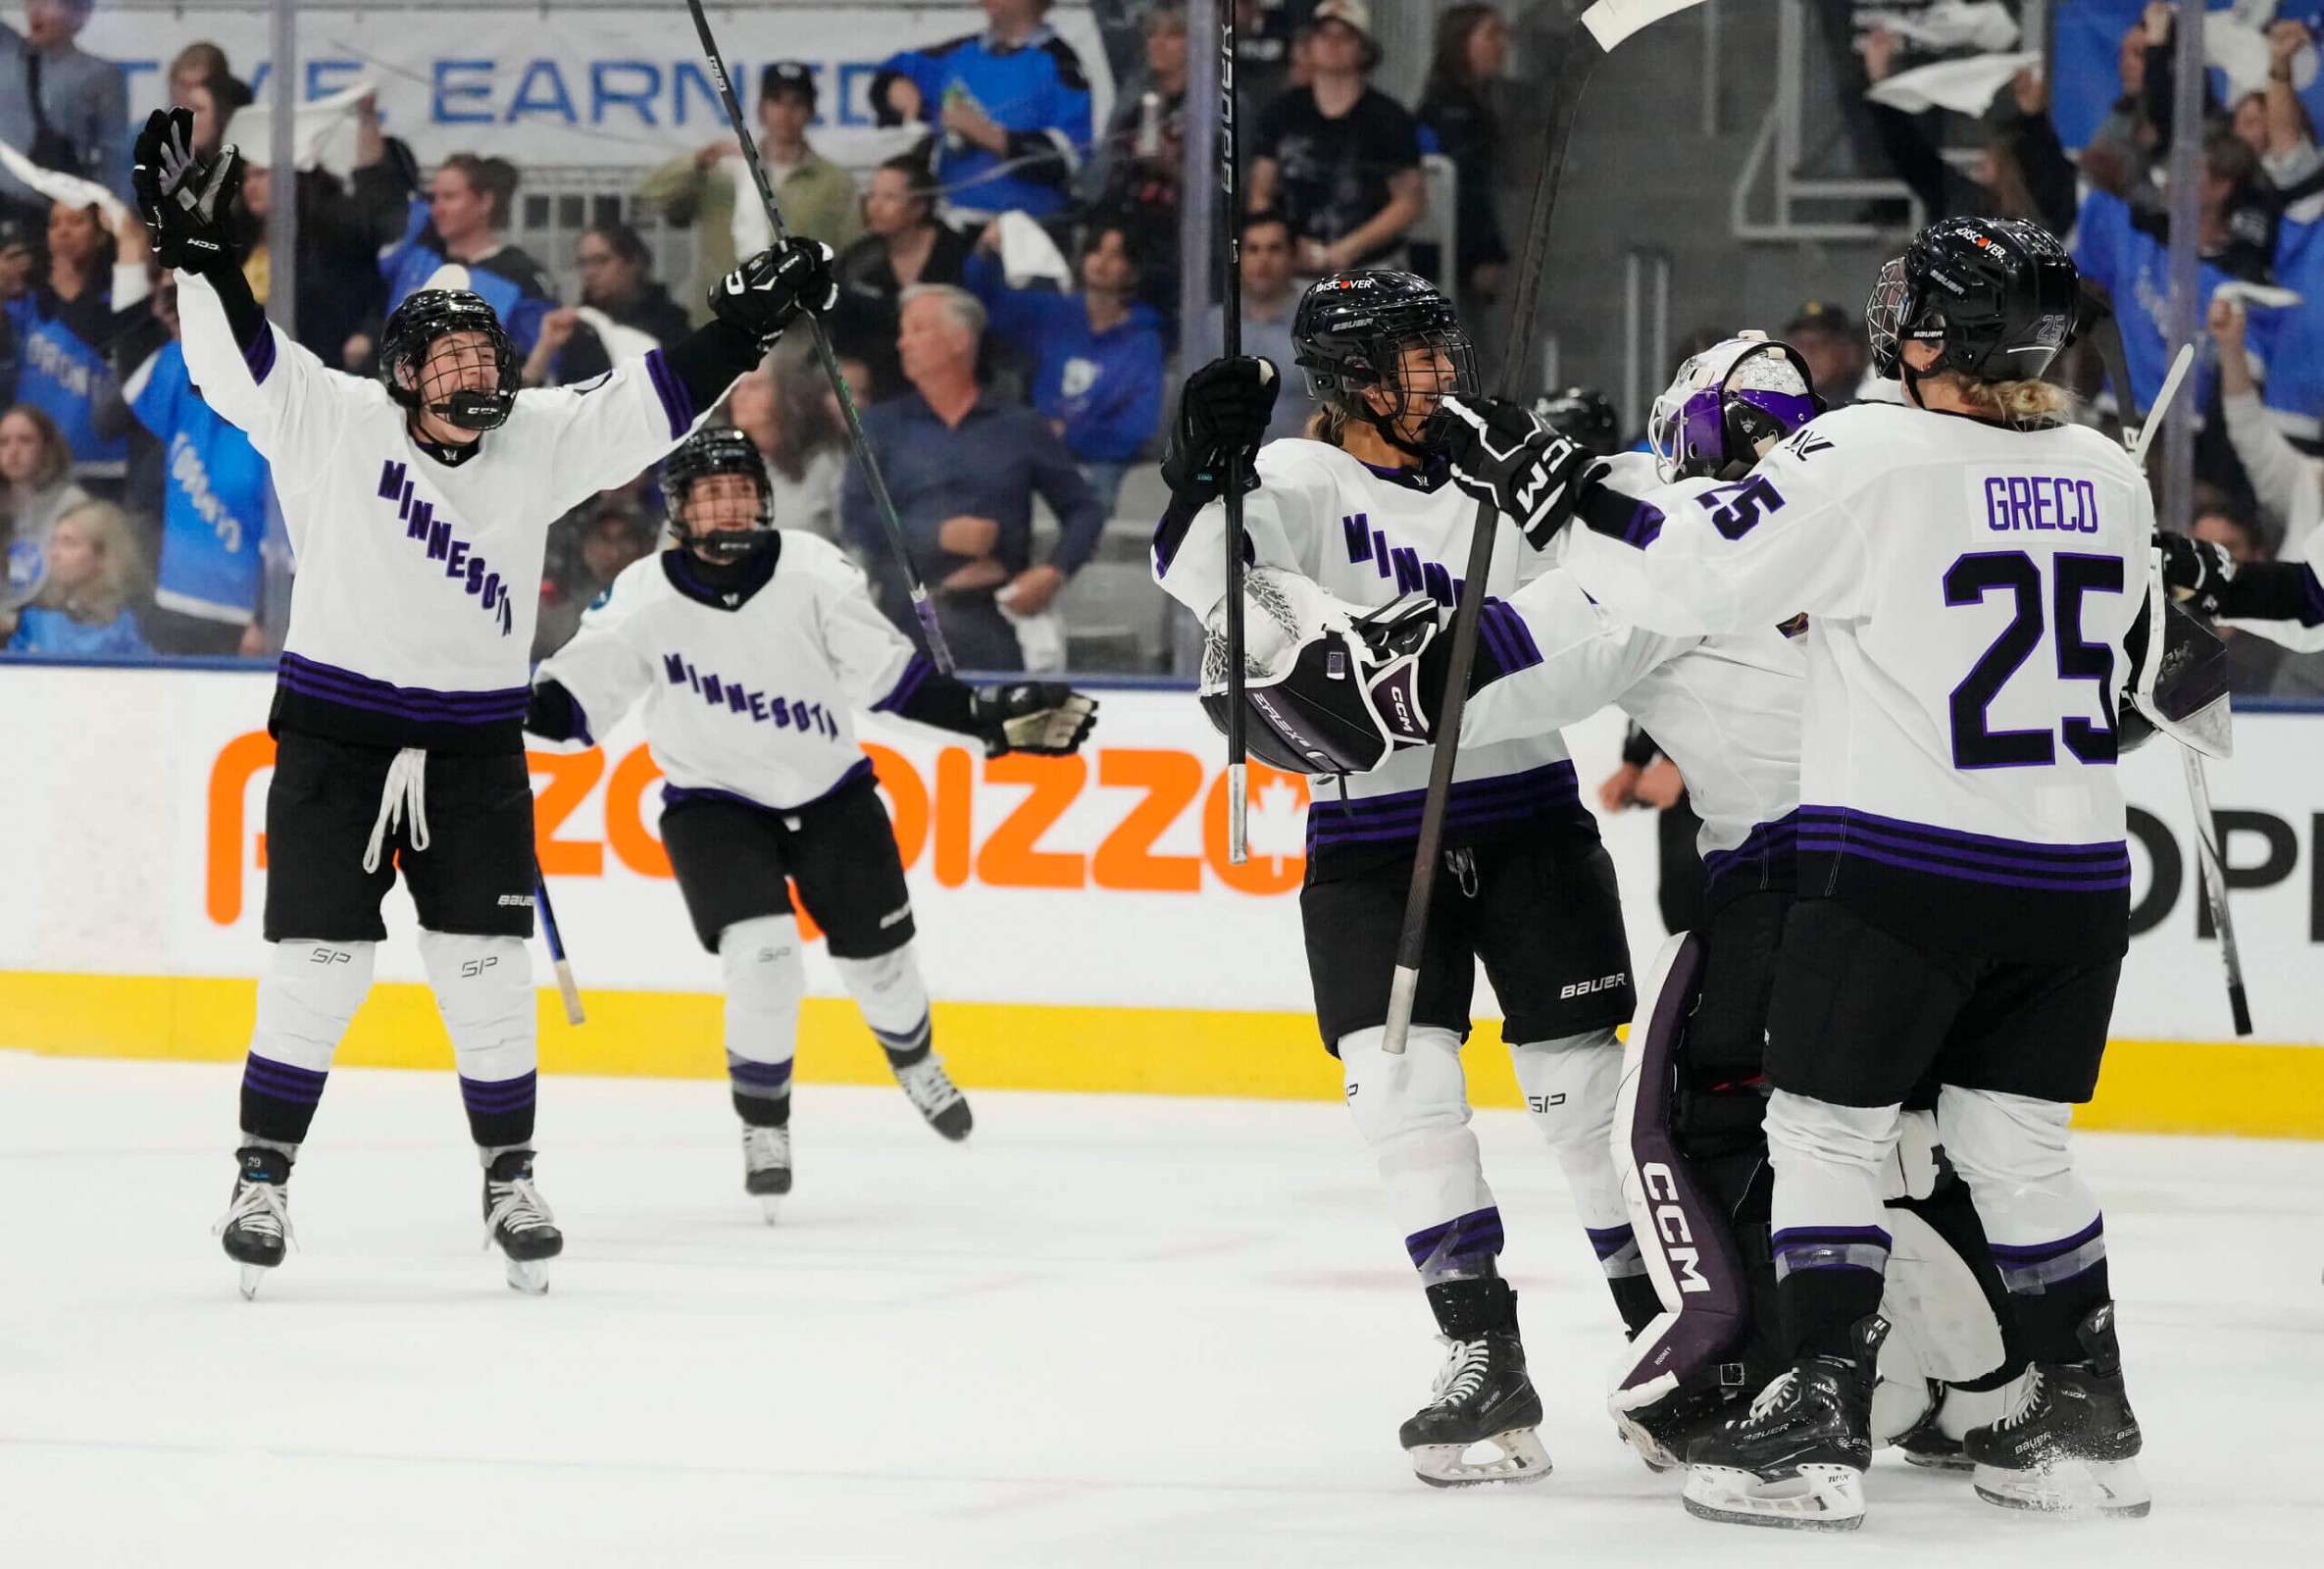 PWHL Minnesota completes reverse sweep of Toronto, advances to finals: 3 takeaways